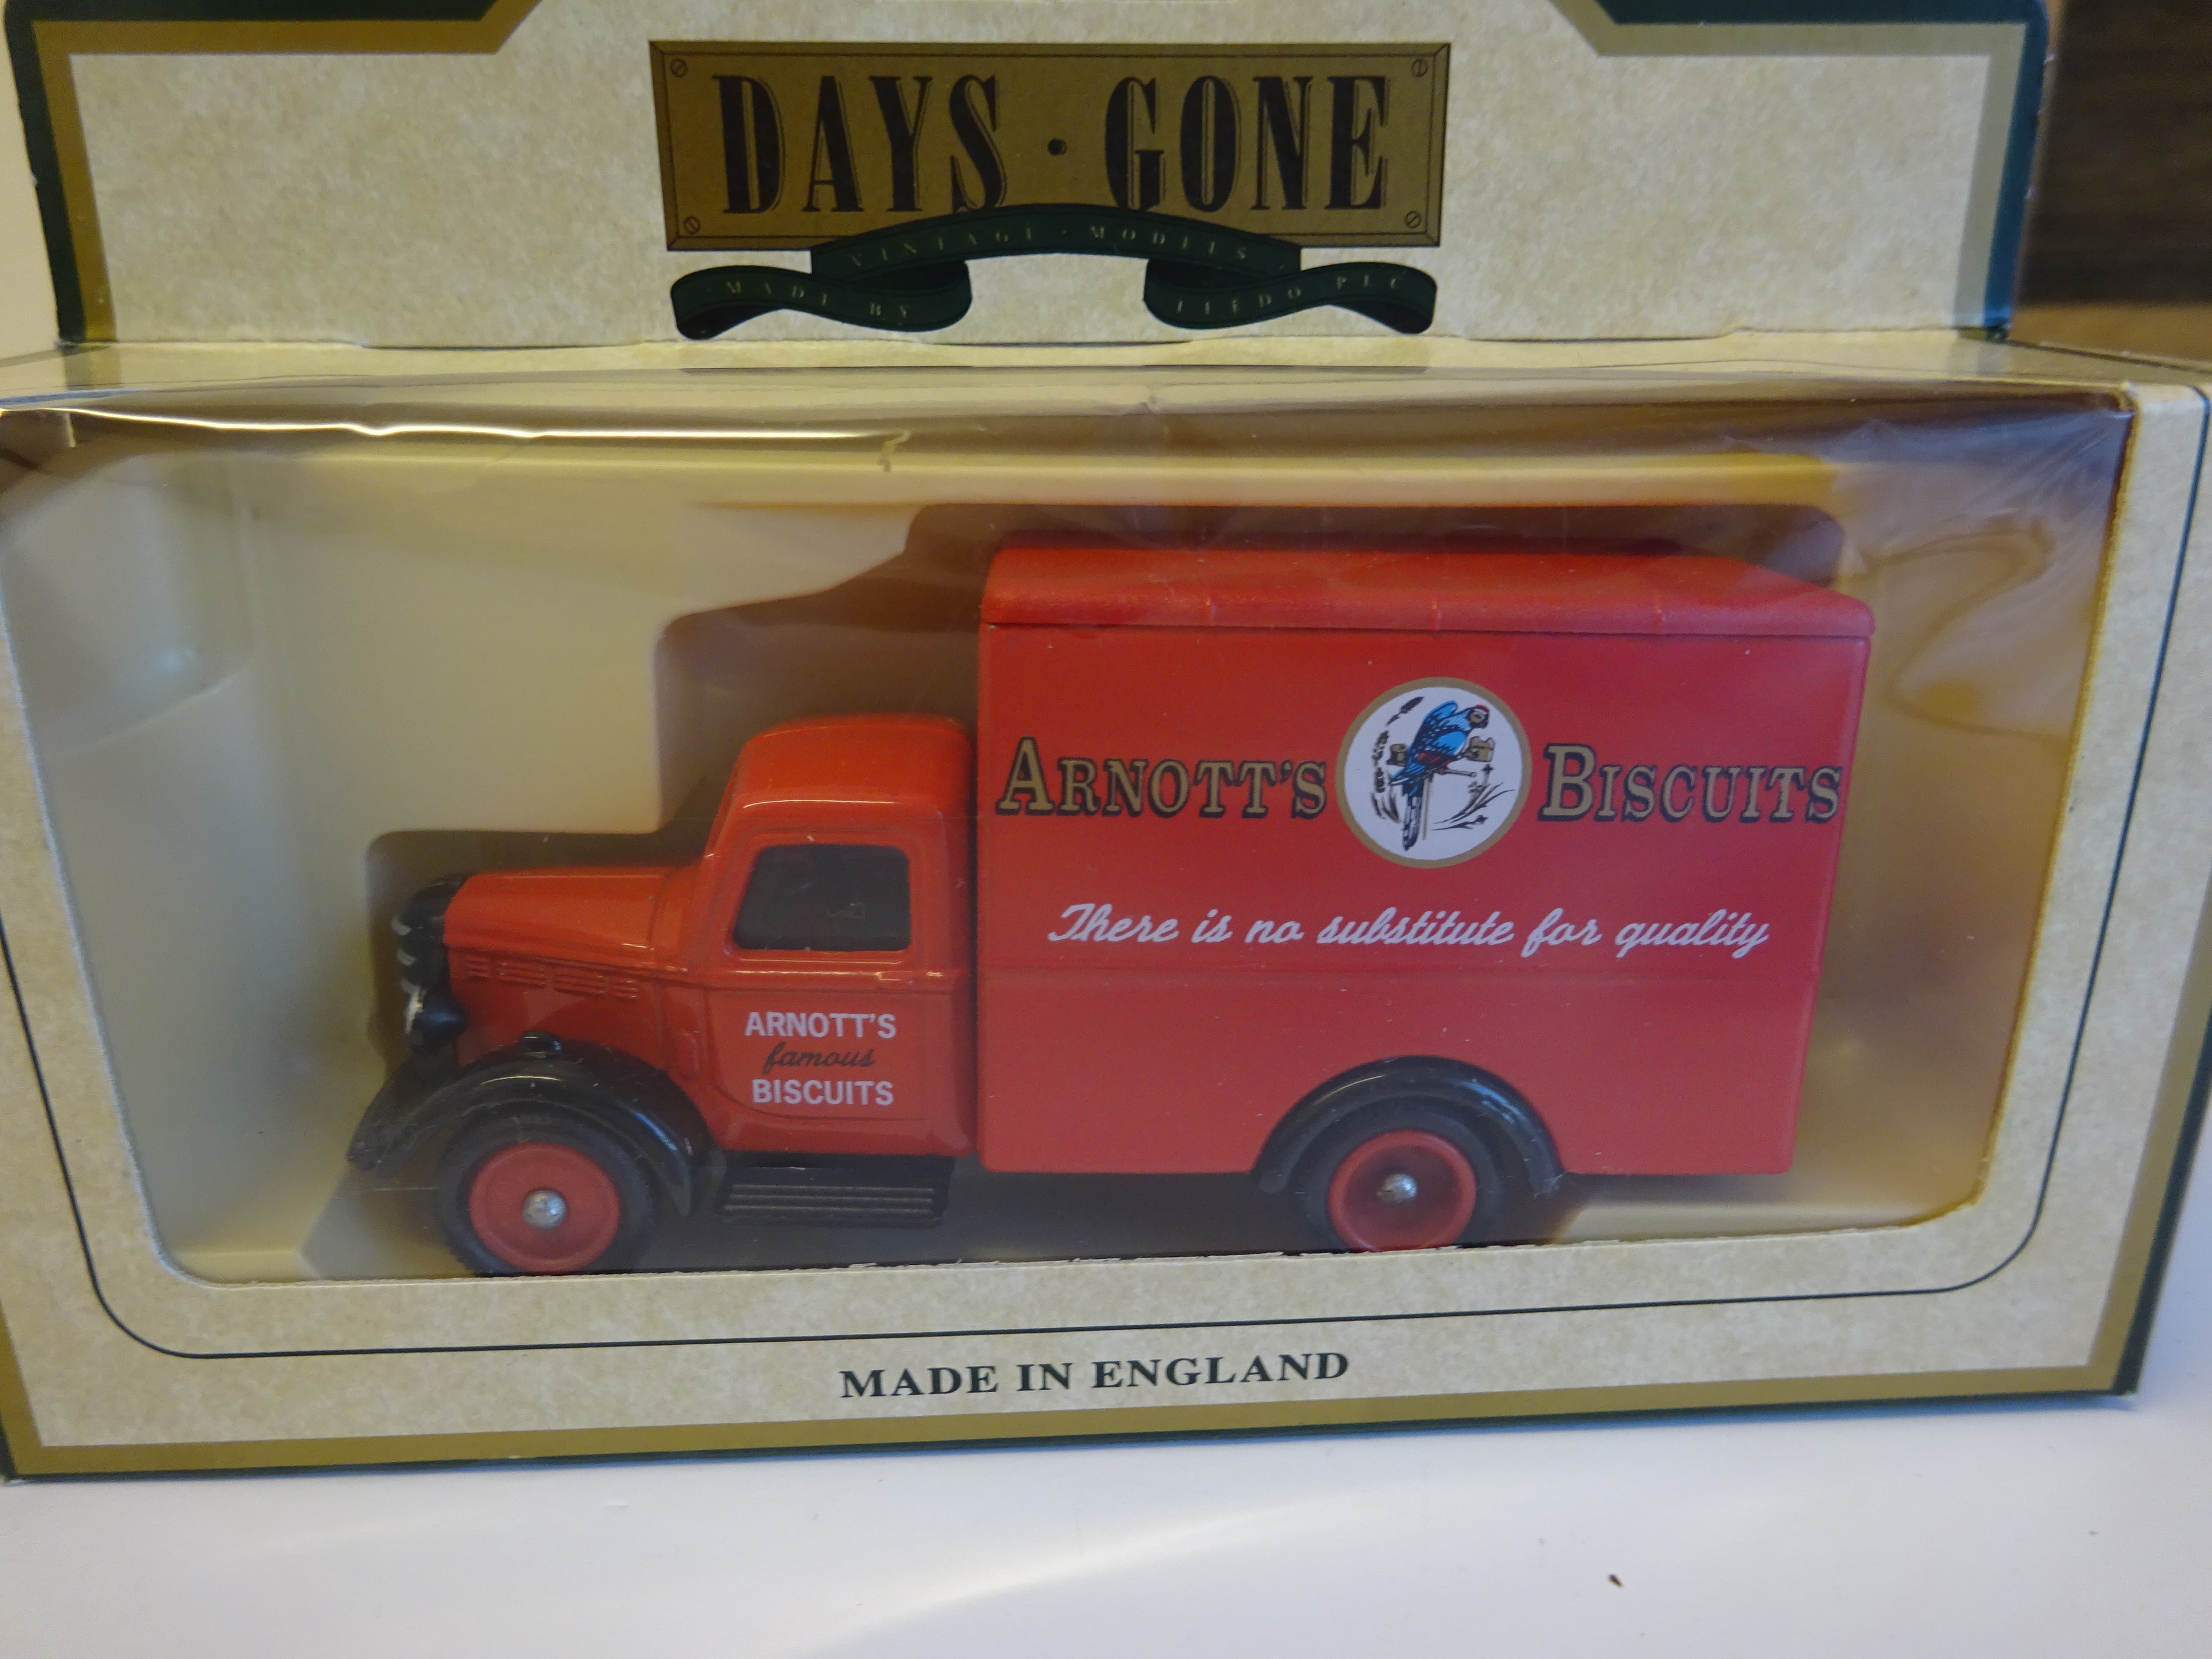 10 x Days Gone commercial vehicles - Image 10 of 10